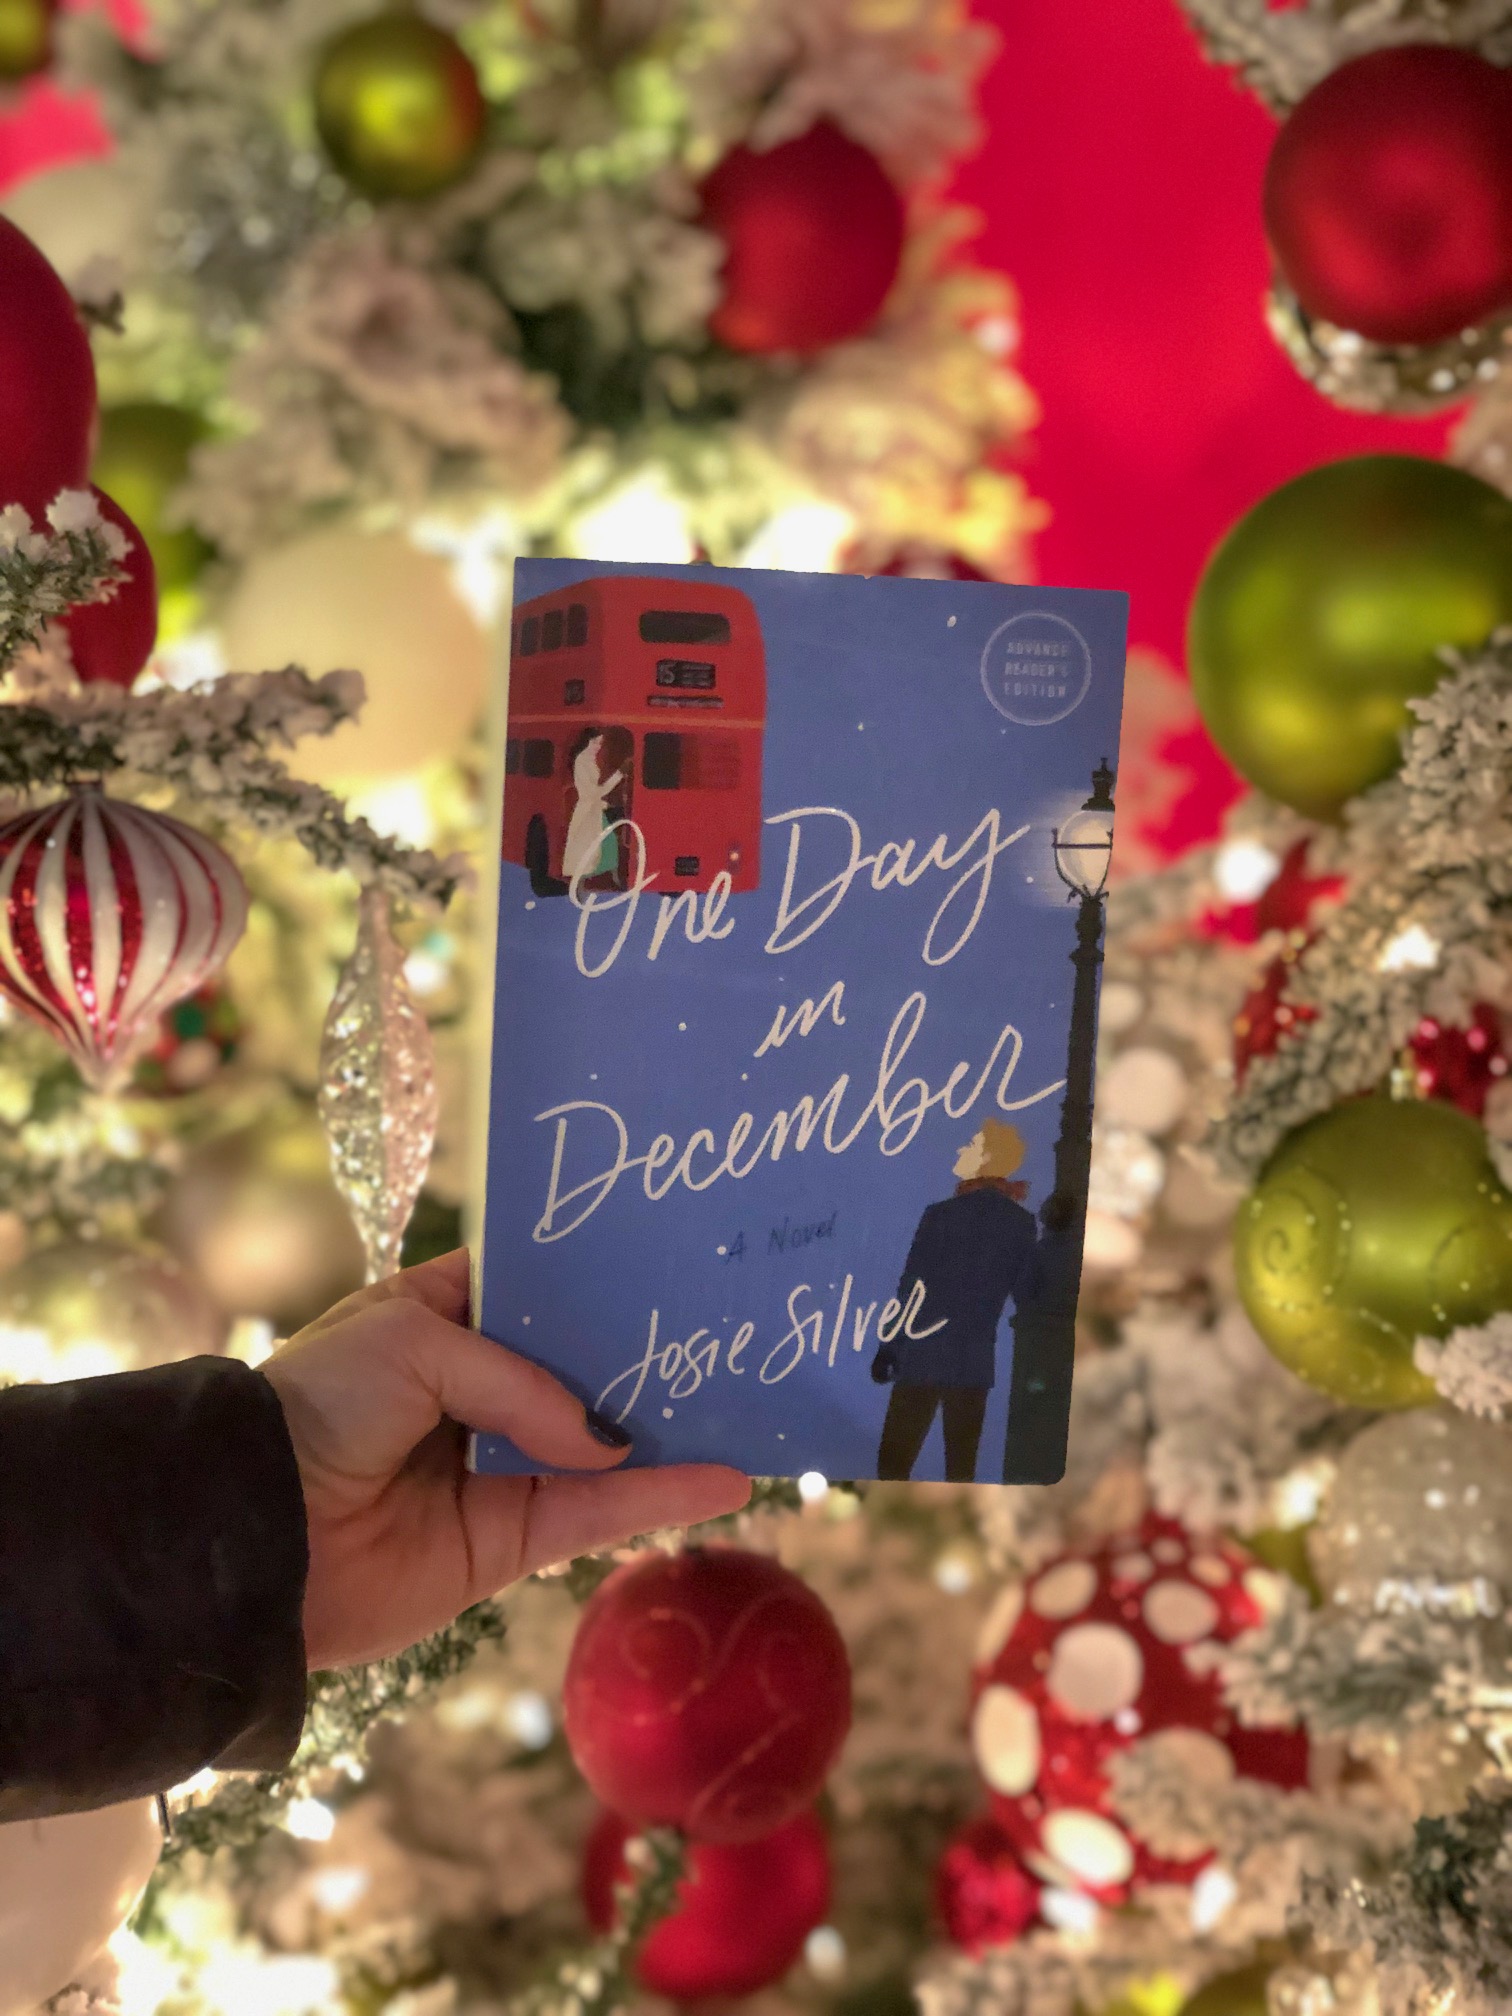 One Day in December by Jodie Silva